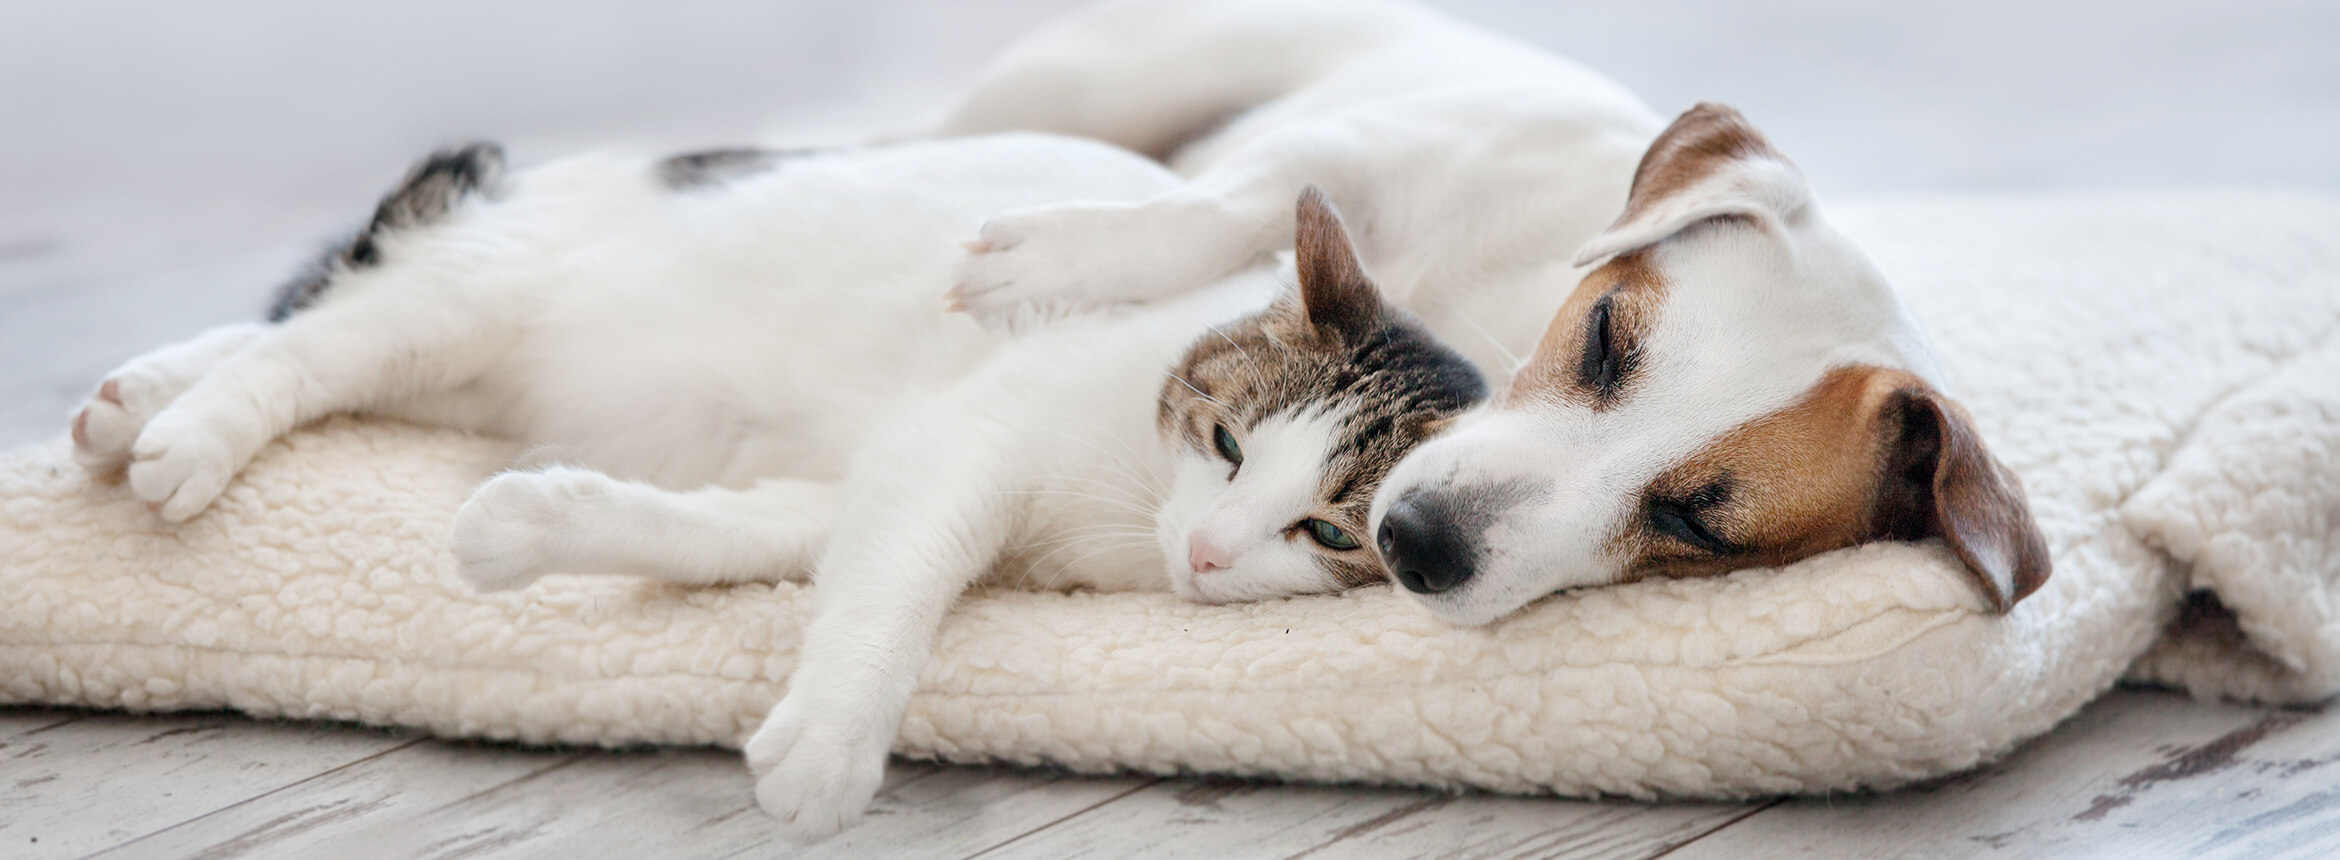 cat and dog napping together